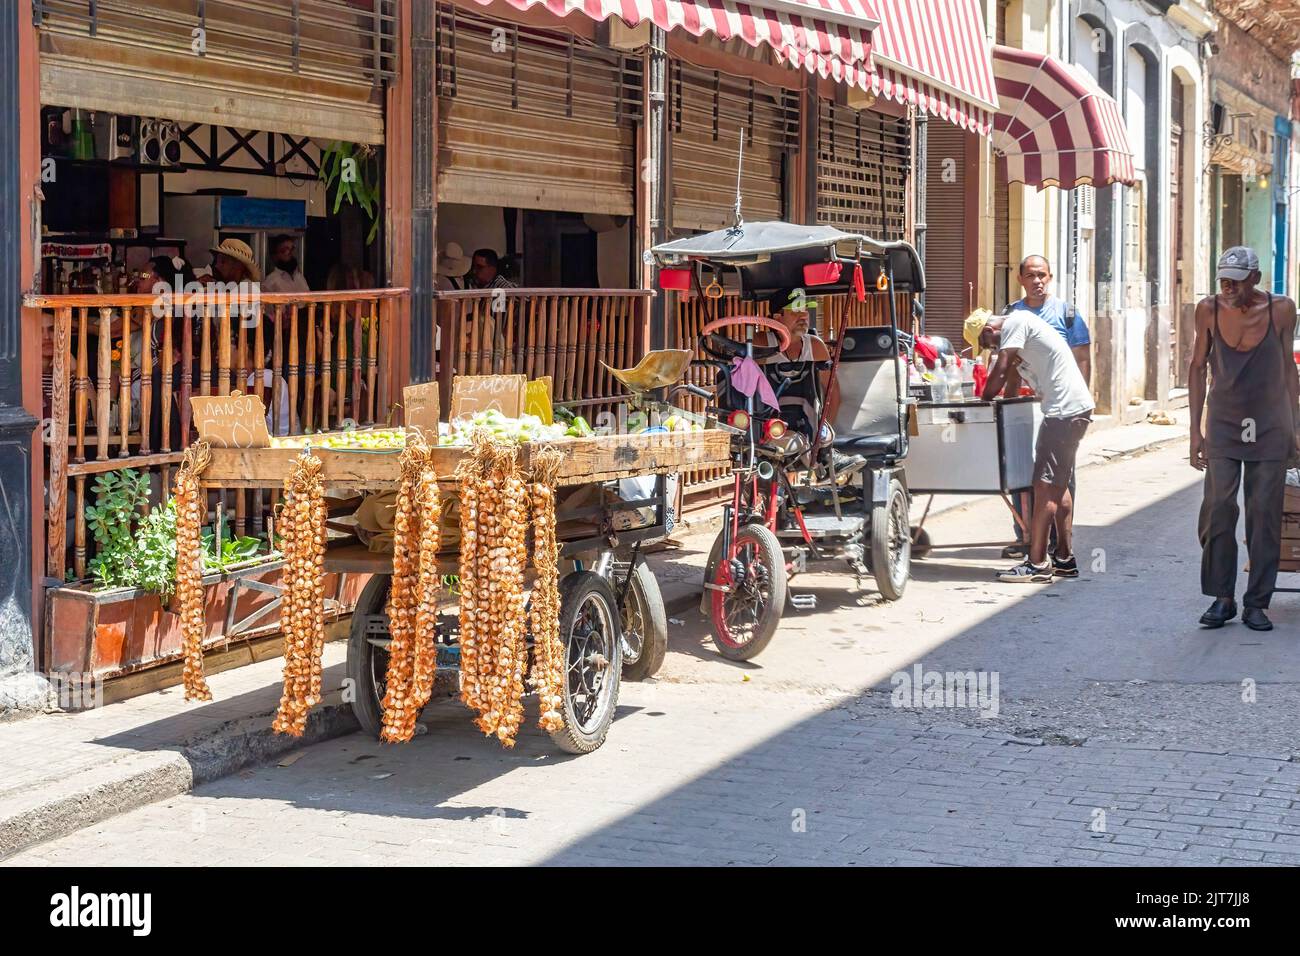 A food selling cart is parked in a narrow city street in Old Havana. Other small businesses are in the background. A slim man walks in the area. Stock Photo